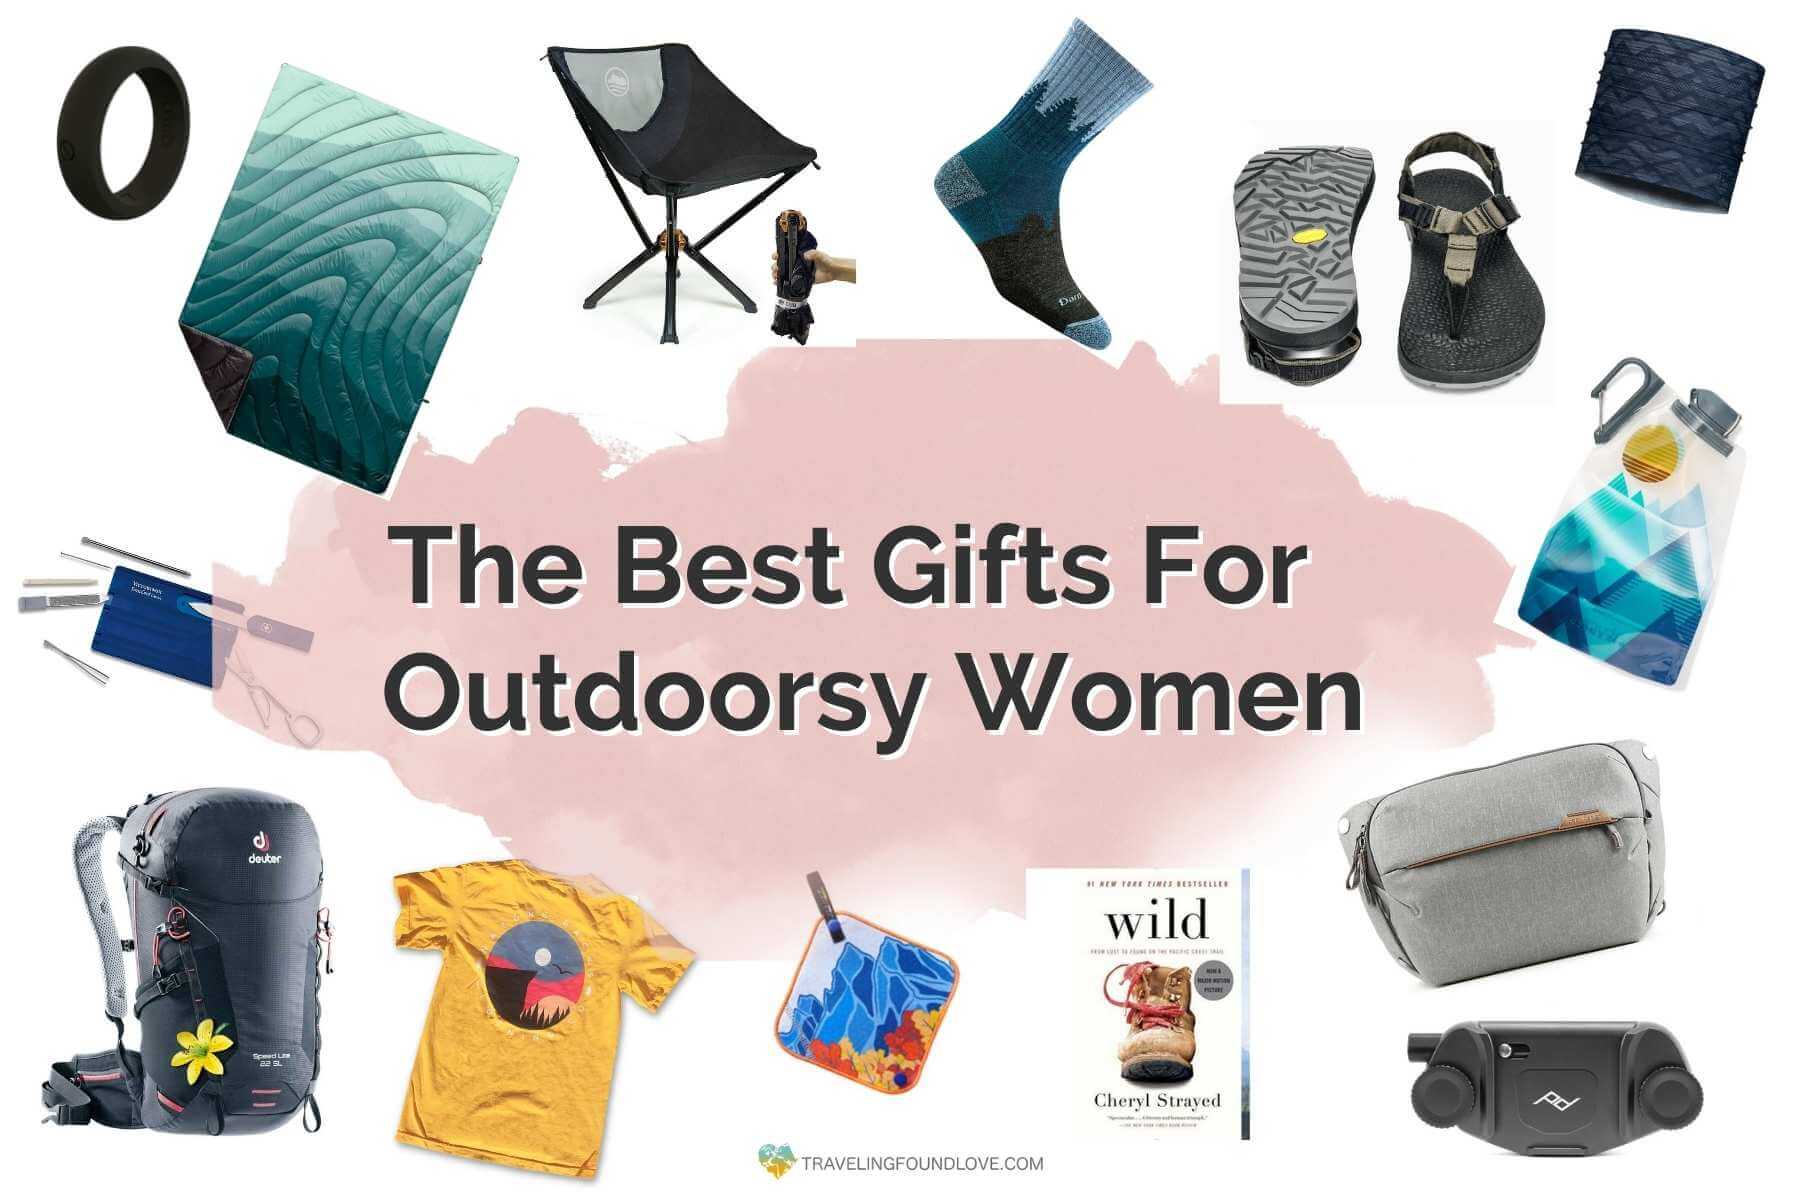 https://www.travelingfoundlove.com/wp-content/uploads/2022/06/The-Best-Gifts-for-Outdoorsy-Women.jpg